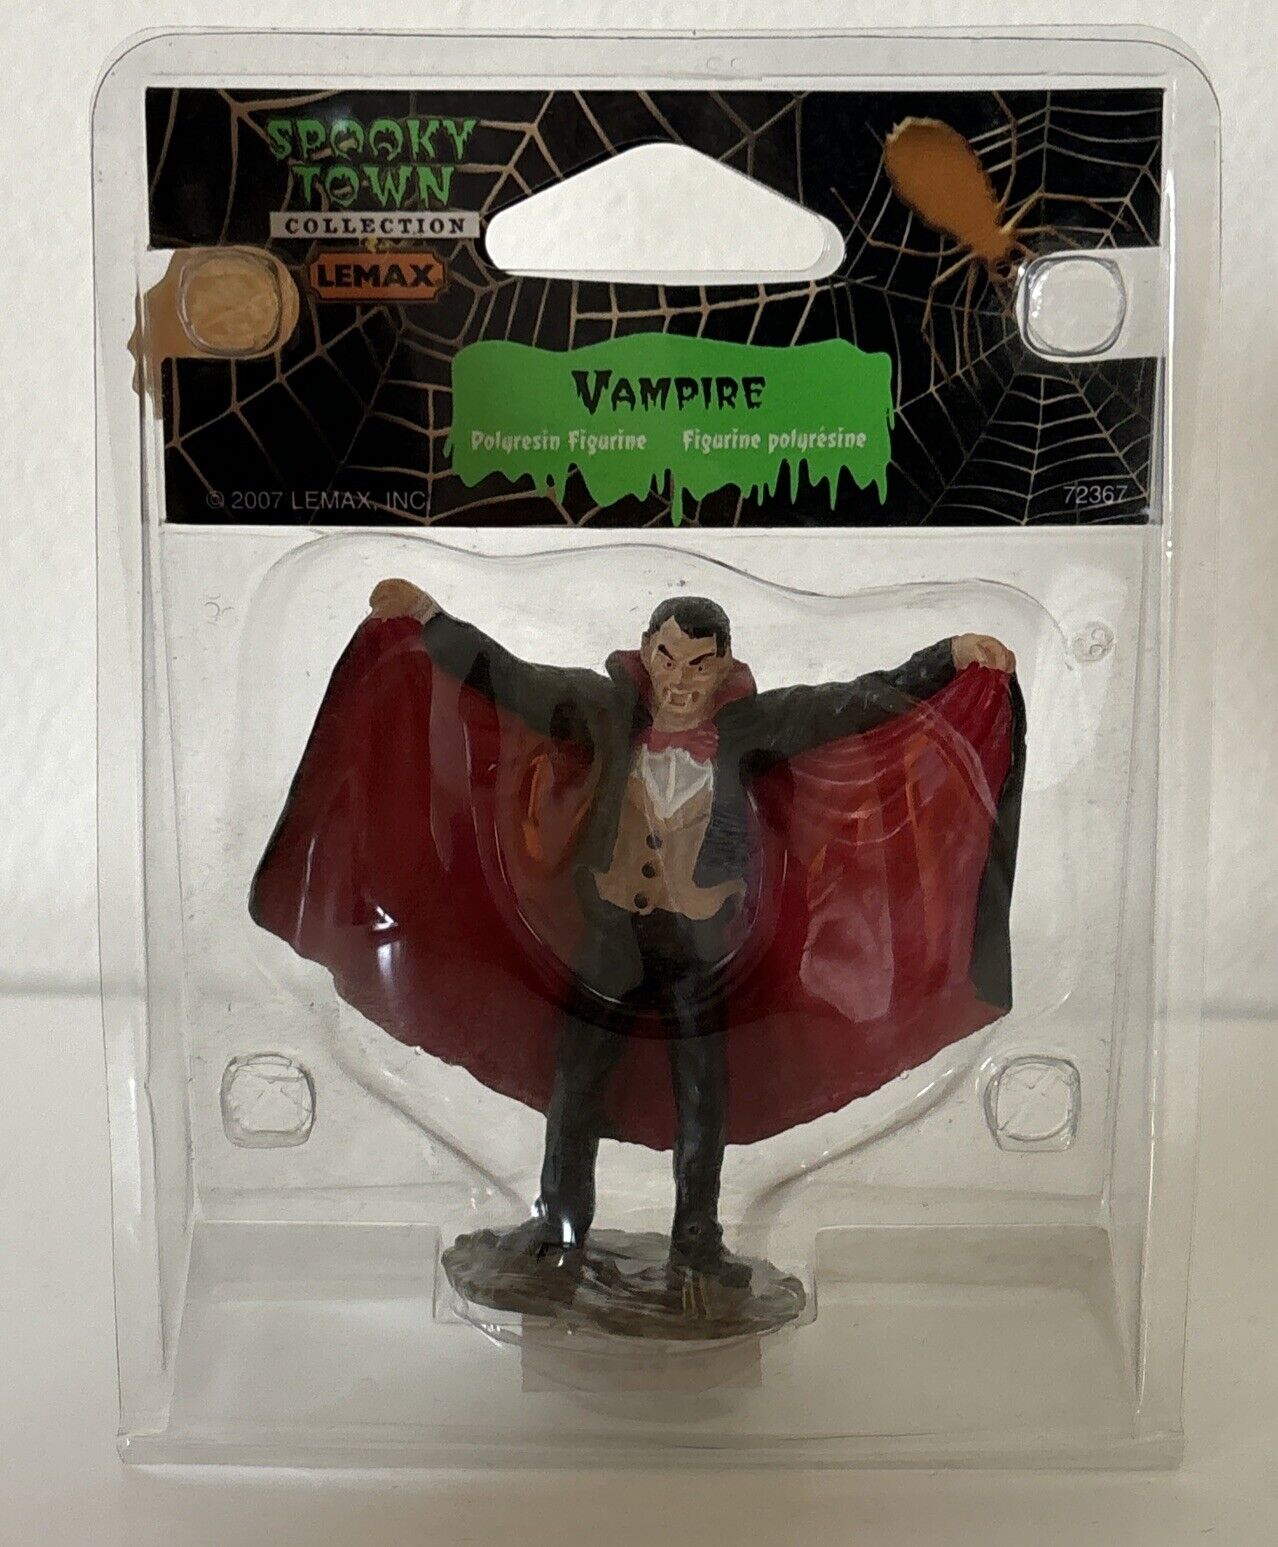 SPOOKY TOWN COLLECTION LEMAX VAMPIRE POLYRESIN FIGURINE 